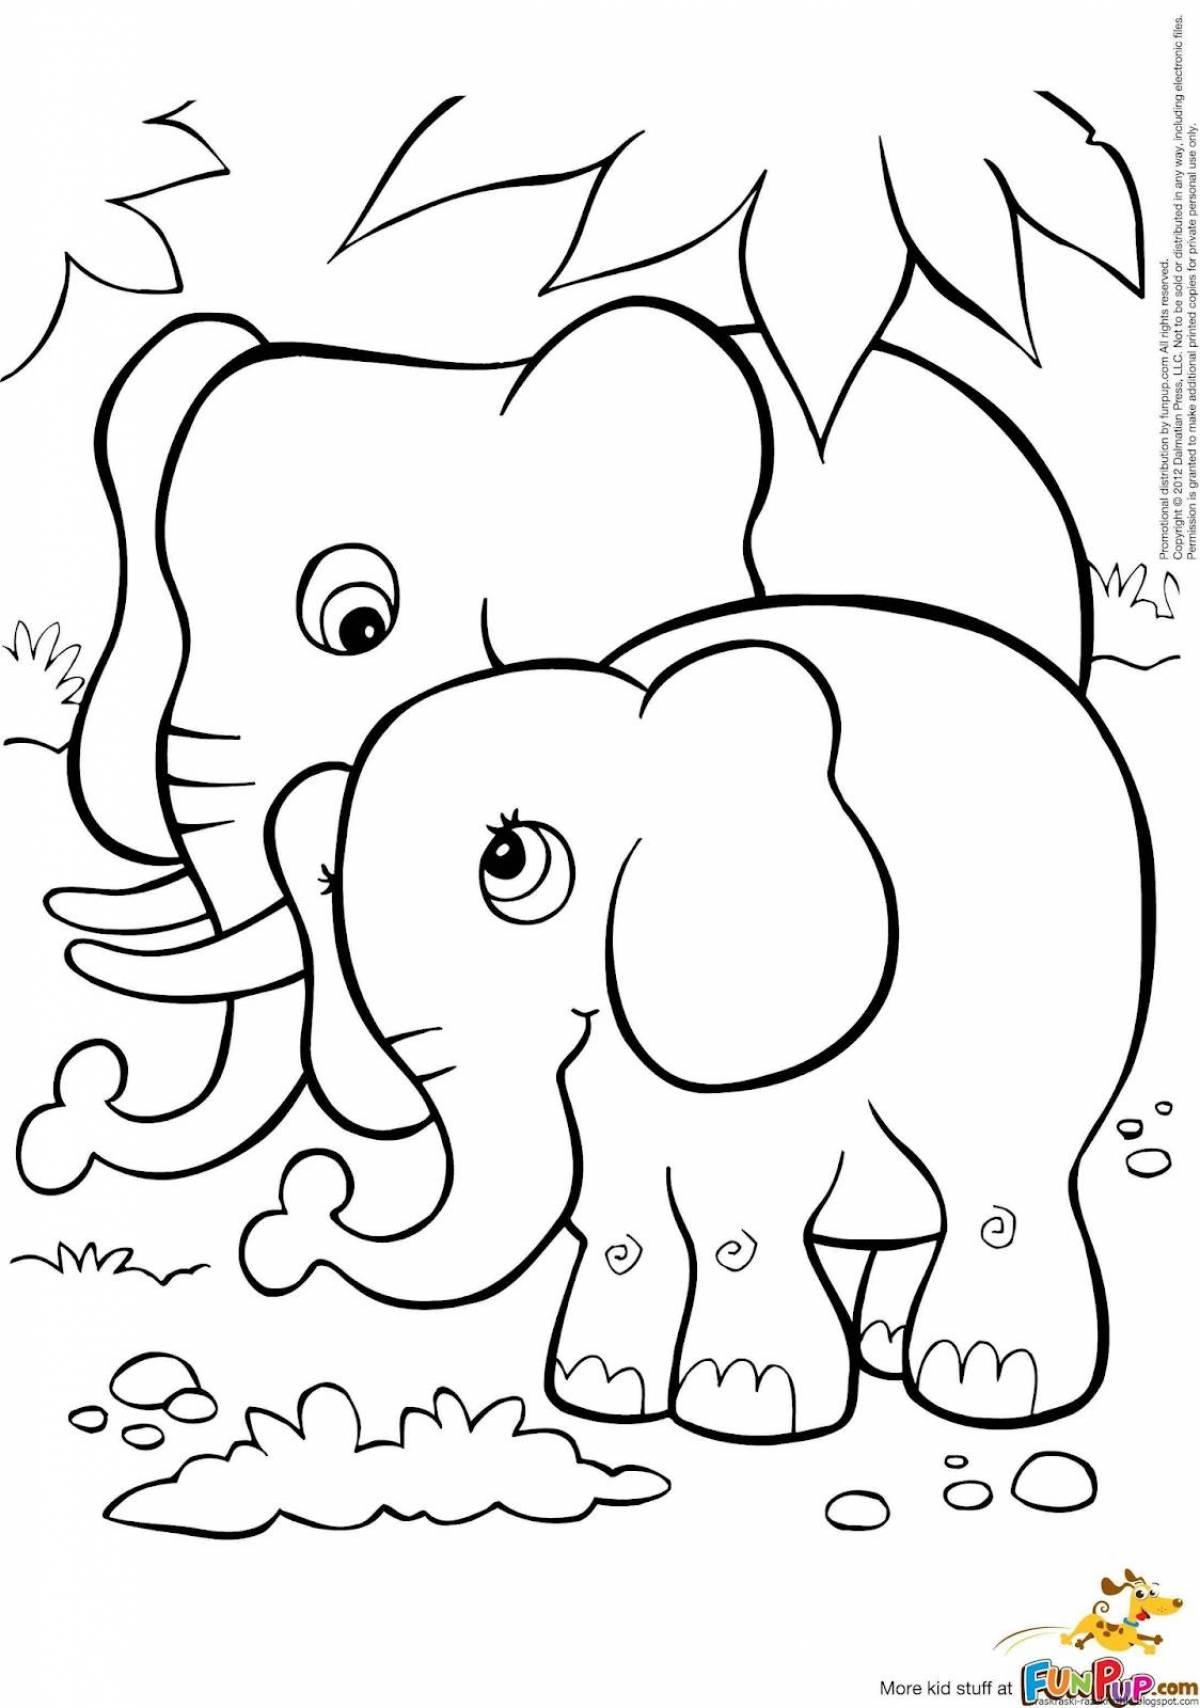 Charming elephant coloring book